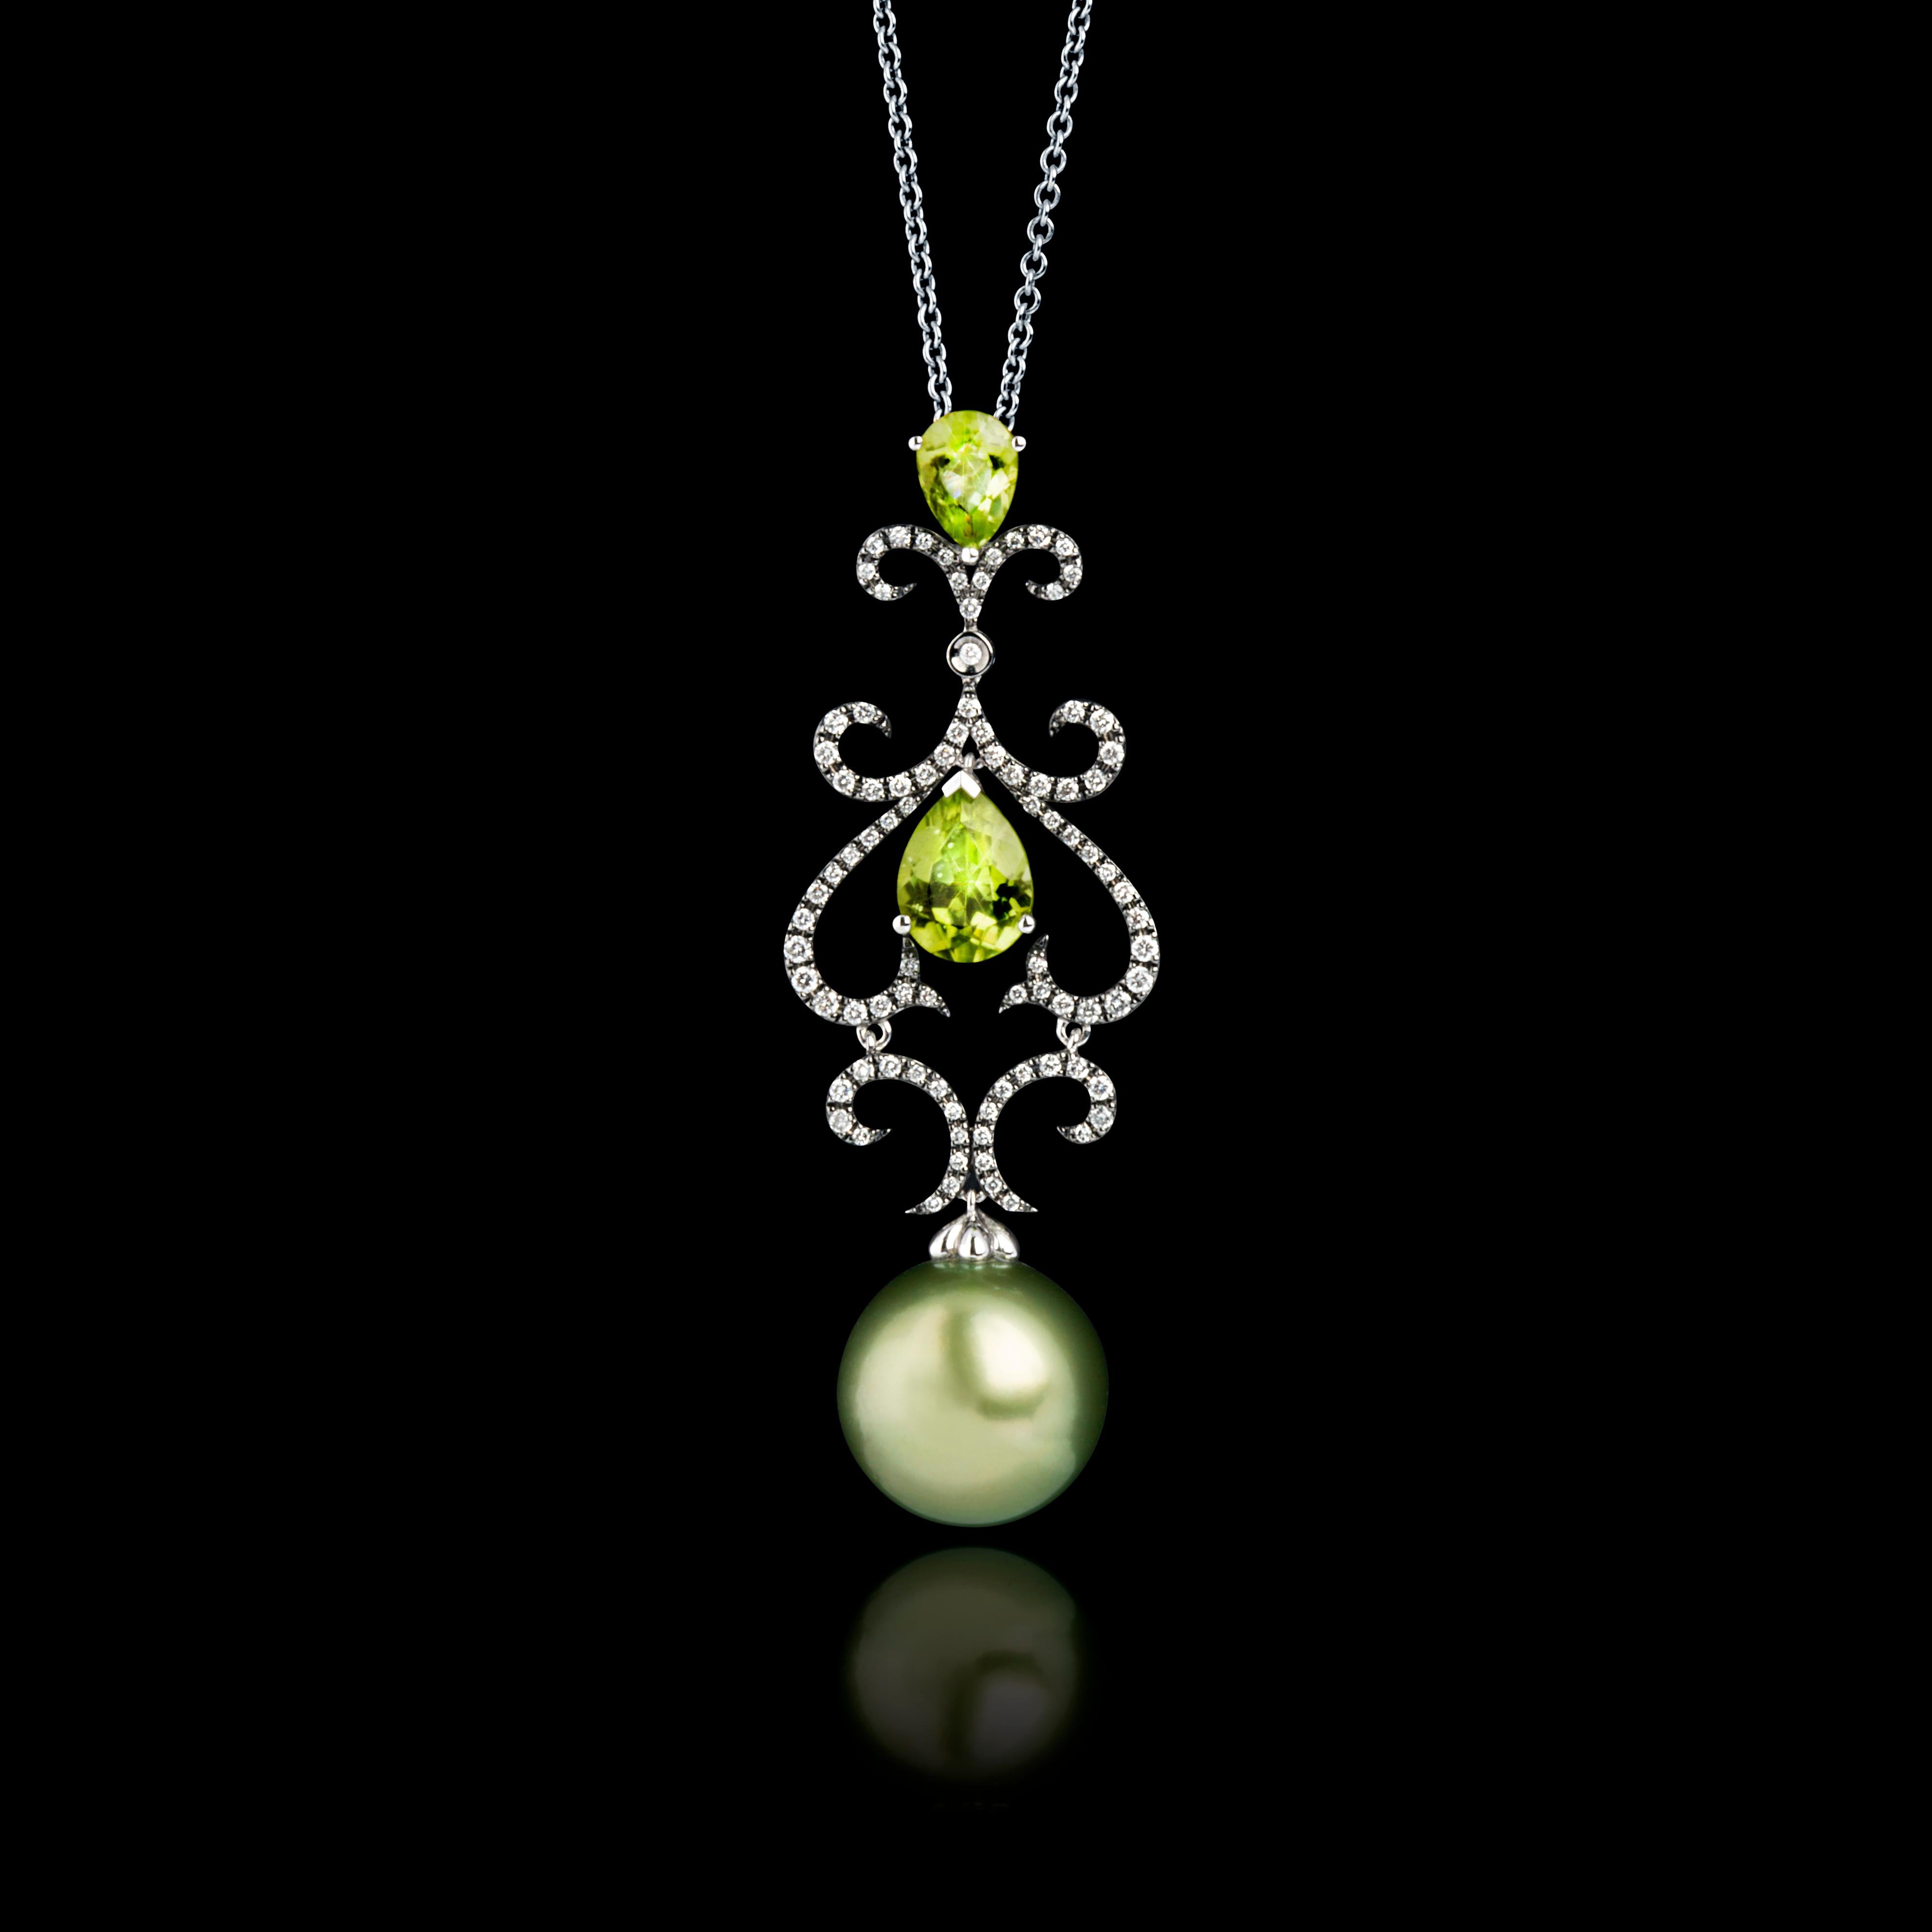 A Tahitian pearls pendant, set with two pear-shaped peridot stones and embellished with small diamonds, mounted in 18 Karat White Gold. This rare natural peacock-green colour pearl of 13.5-14mm is paired with bright green crystal clear peridots